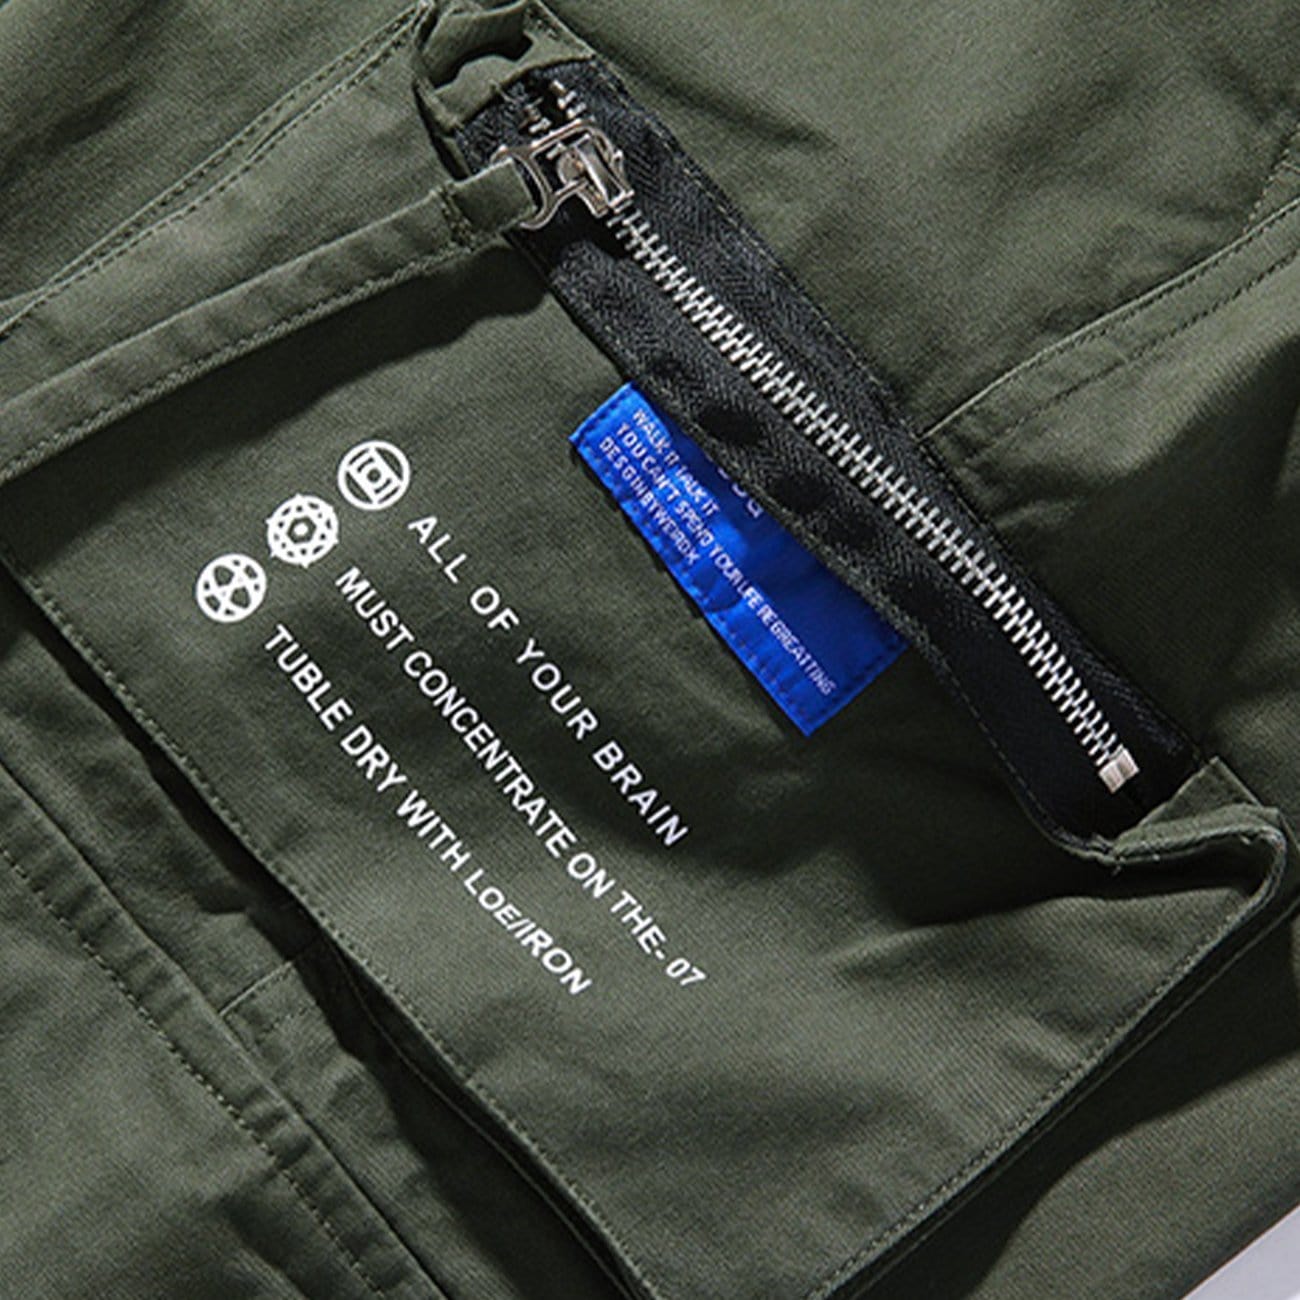 TO Patchwork Pockets Cargo Pants